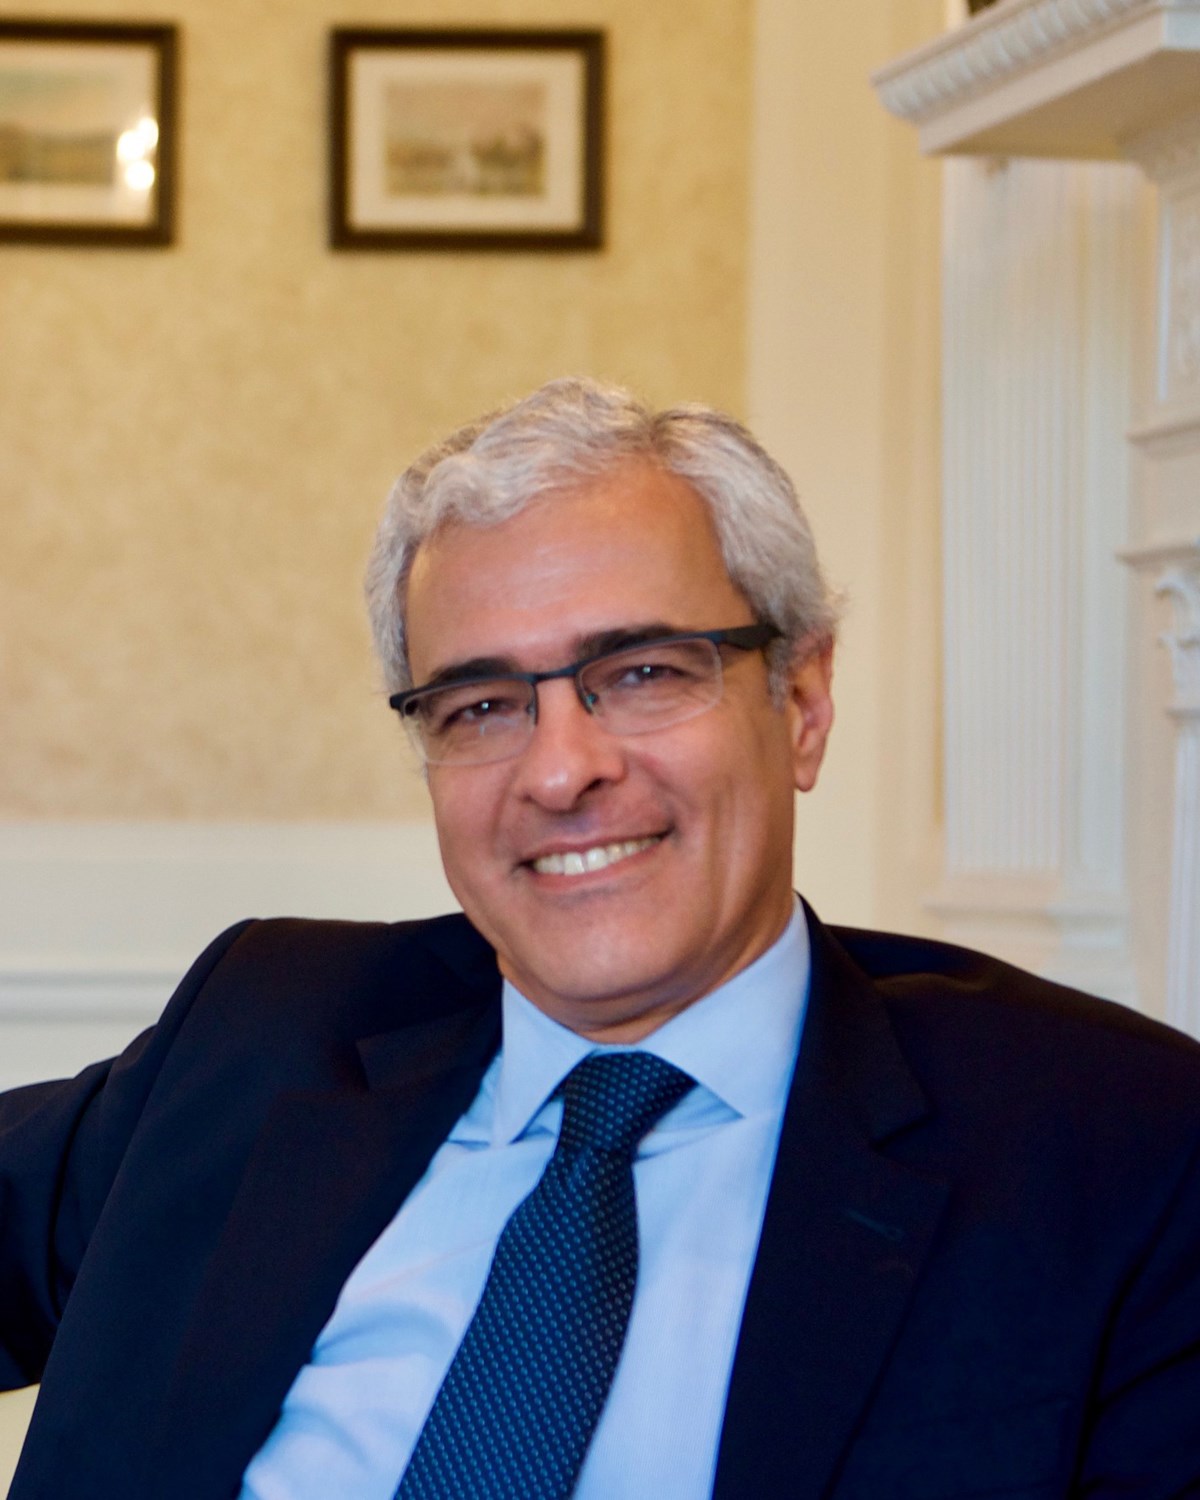 Ambassador Domingos Fezas Vital, is a career diplomat in the Portuguese Foreign Service, and has been Portugal’s Ambassador to the United States of America since 2015.